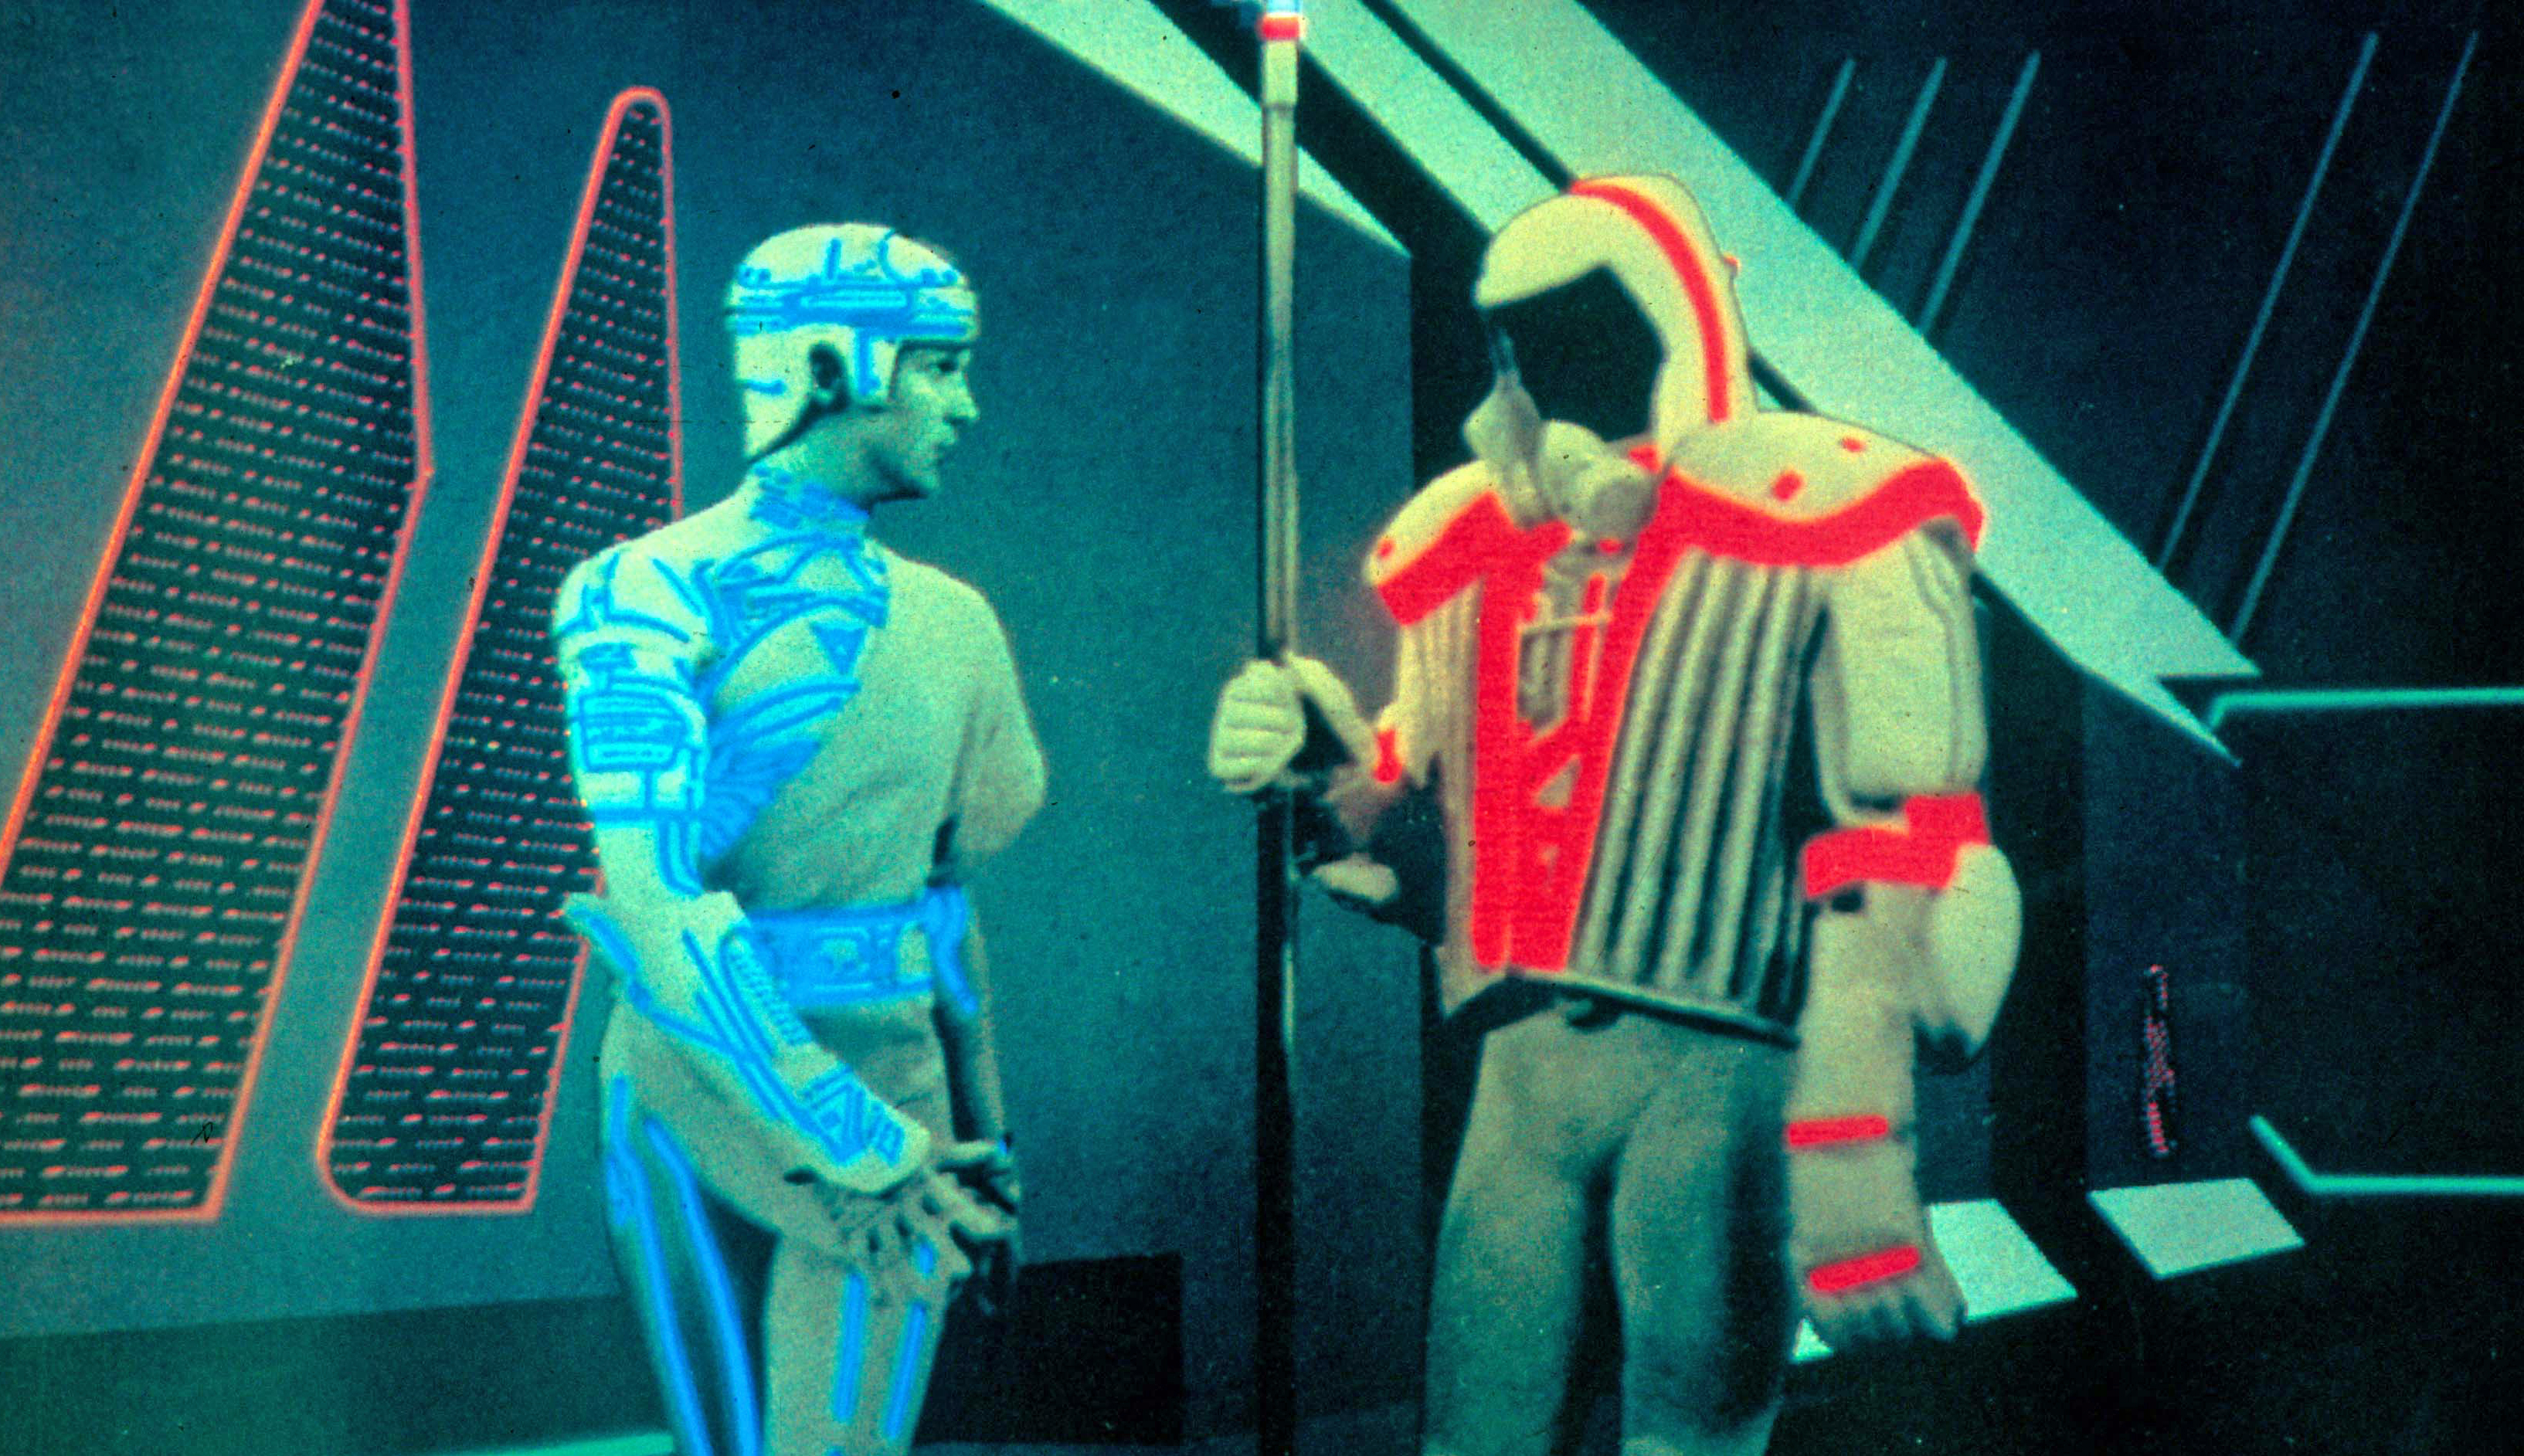 'When films like Tron appeared I became more and more intrigued in the “how” to achieve such computer visualisations.'